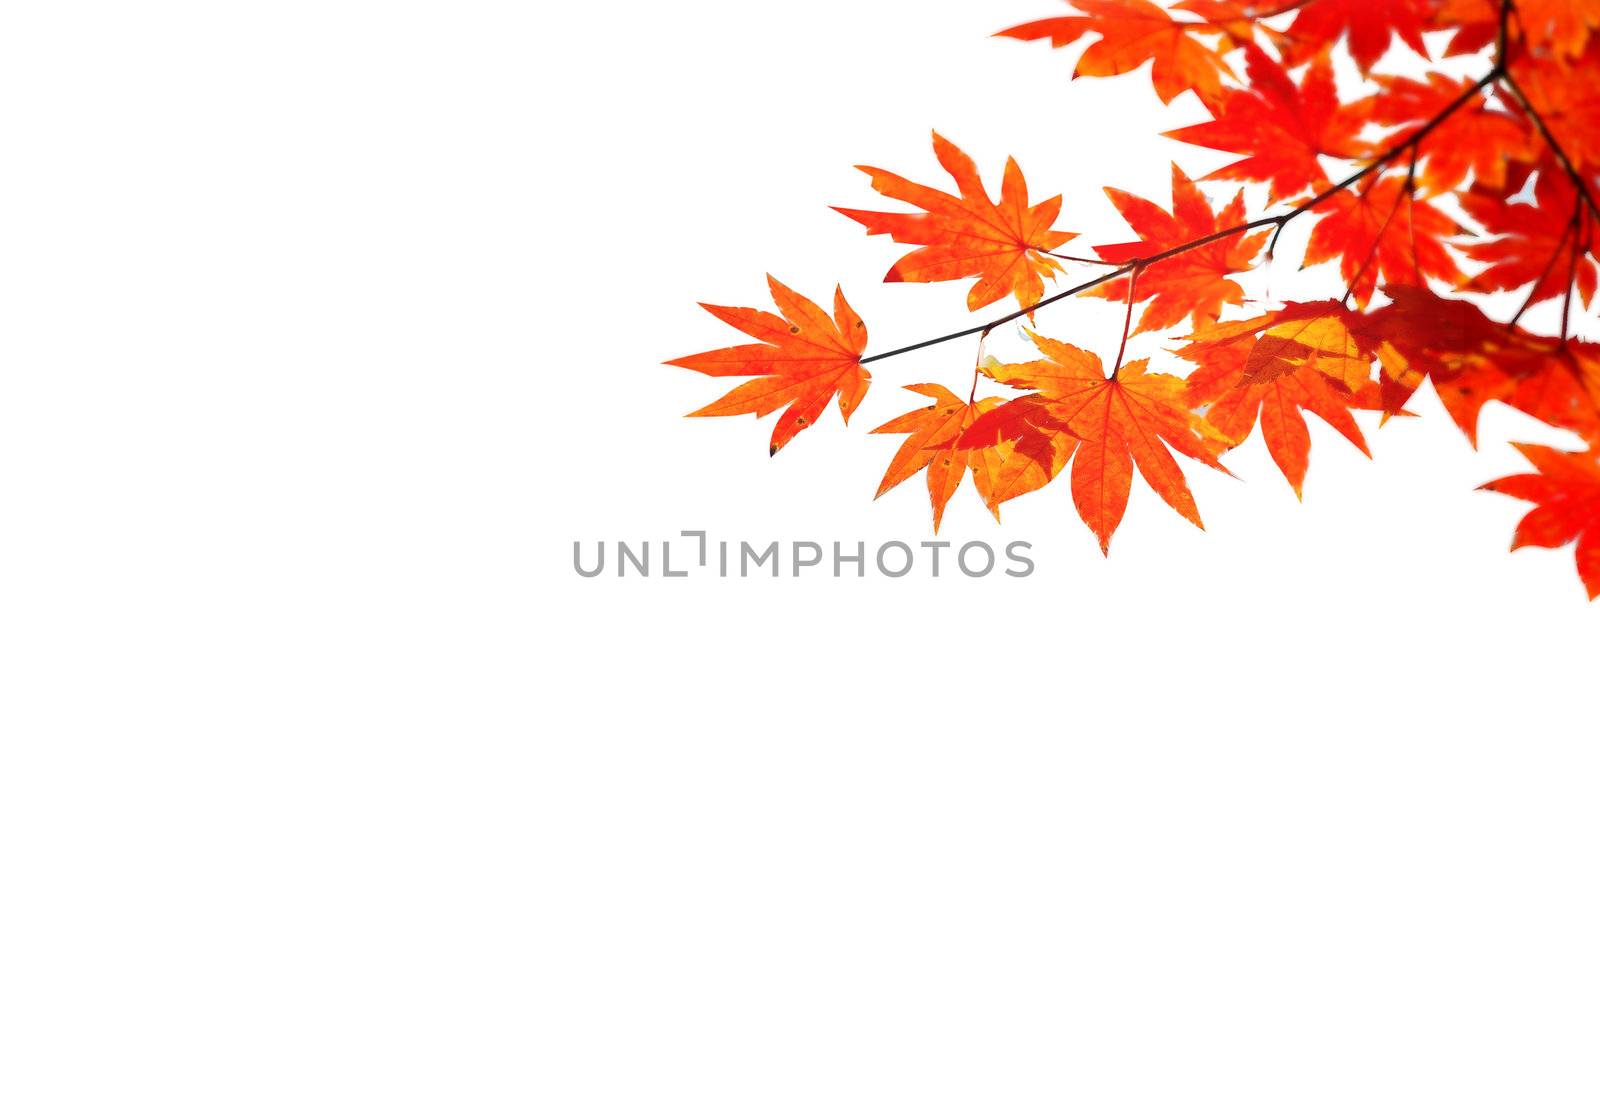 Autumn situation with red and yellow leaves for your autumn design